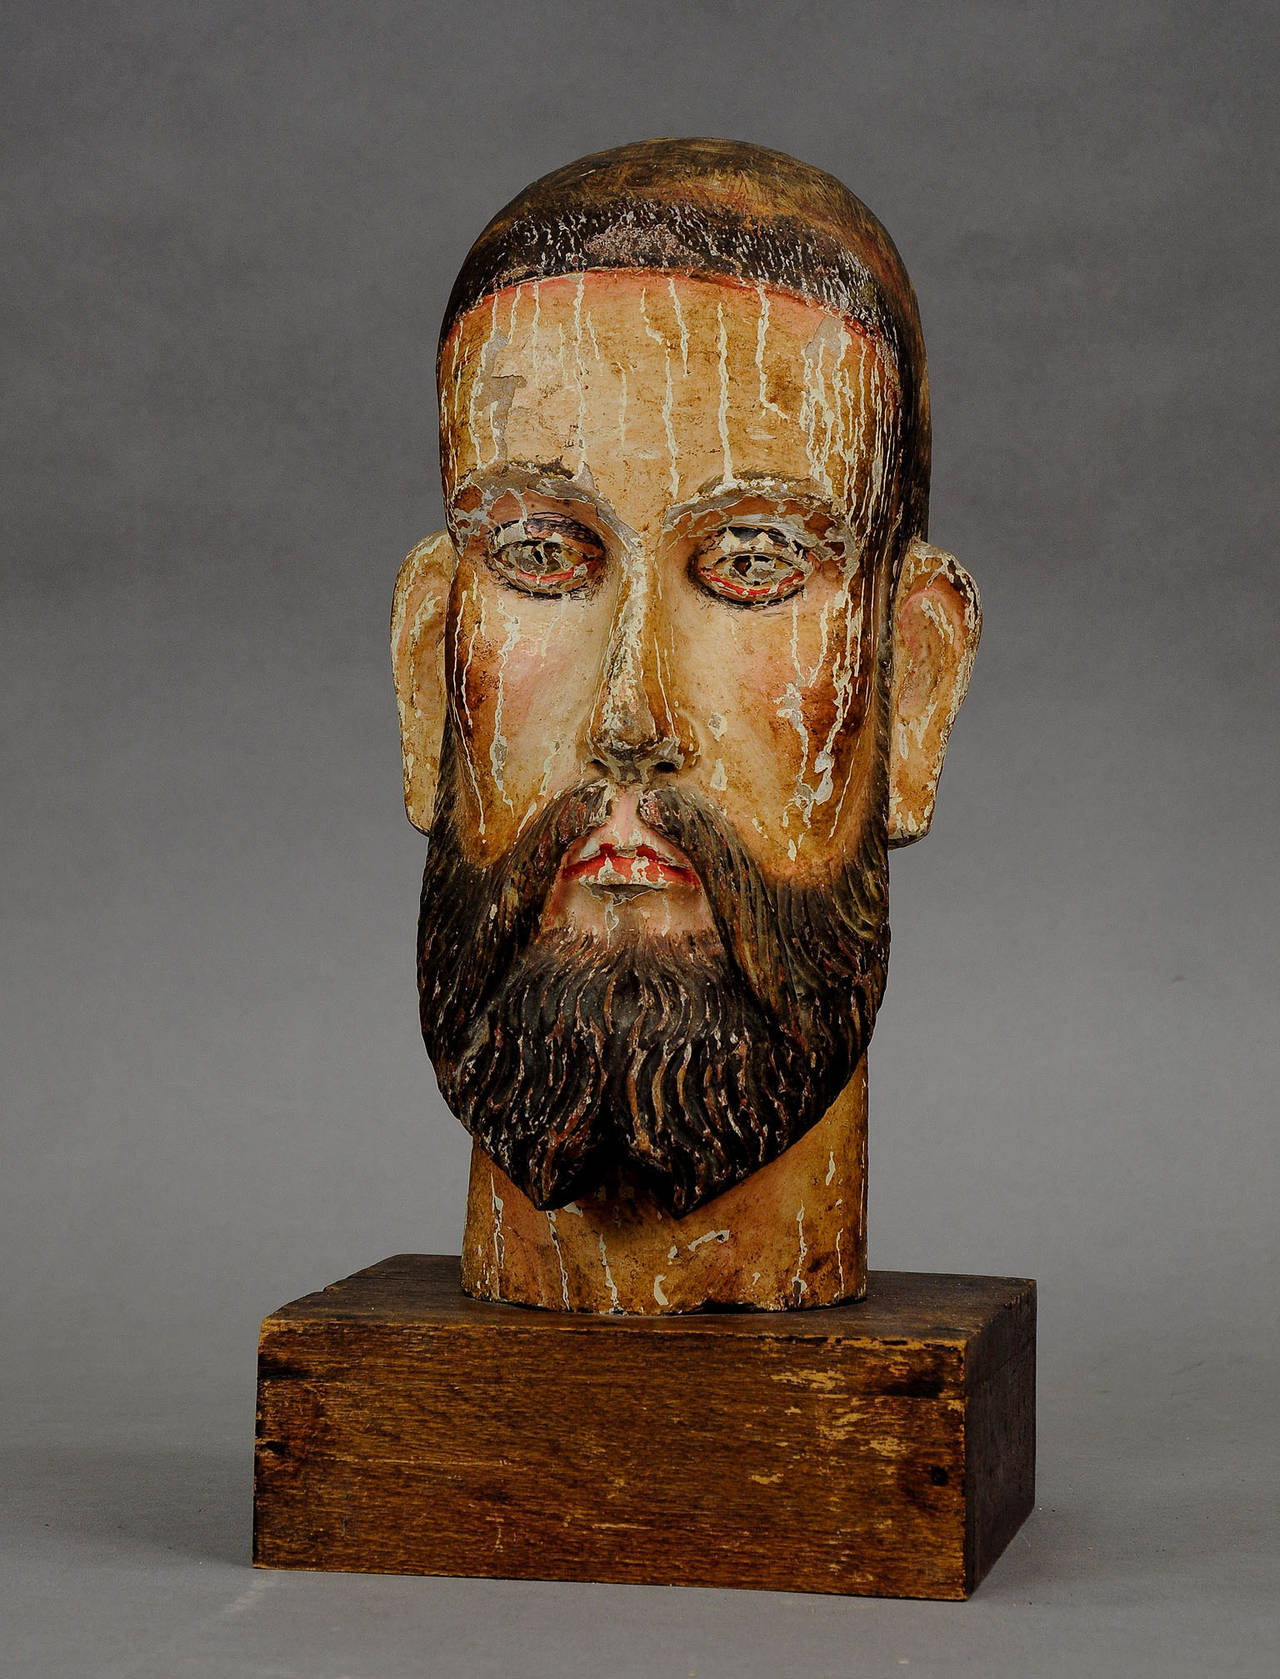 an Armenic ? 16th century carved and painted head of christ, mounted on a new wood pedestal. (unrestored condition, painting partly flaked off)